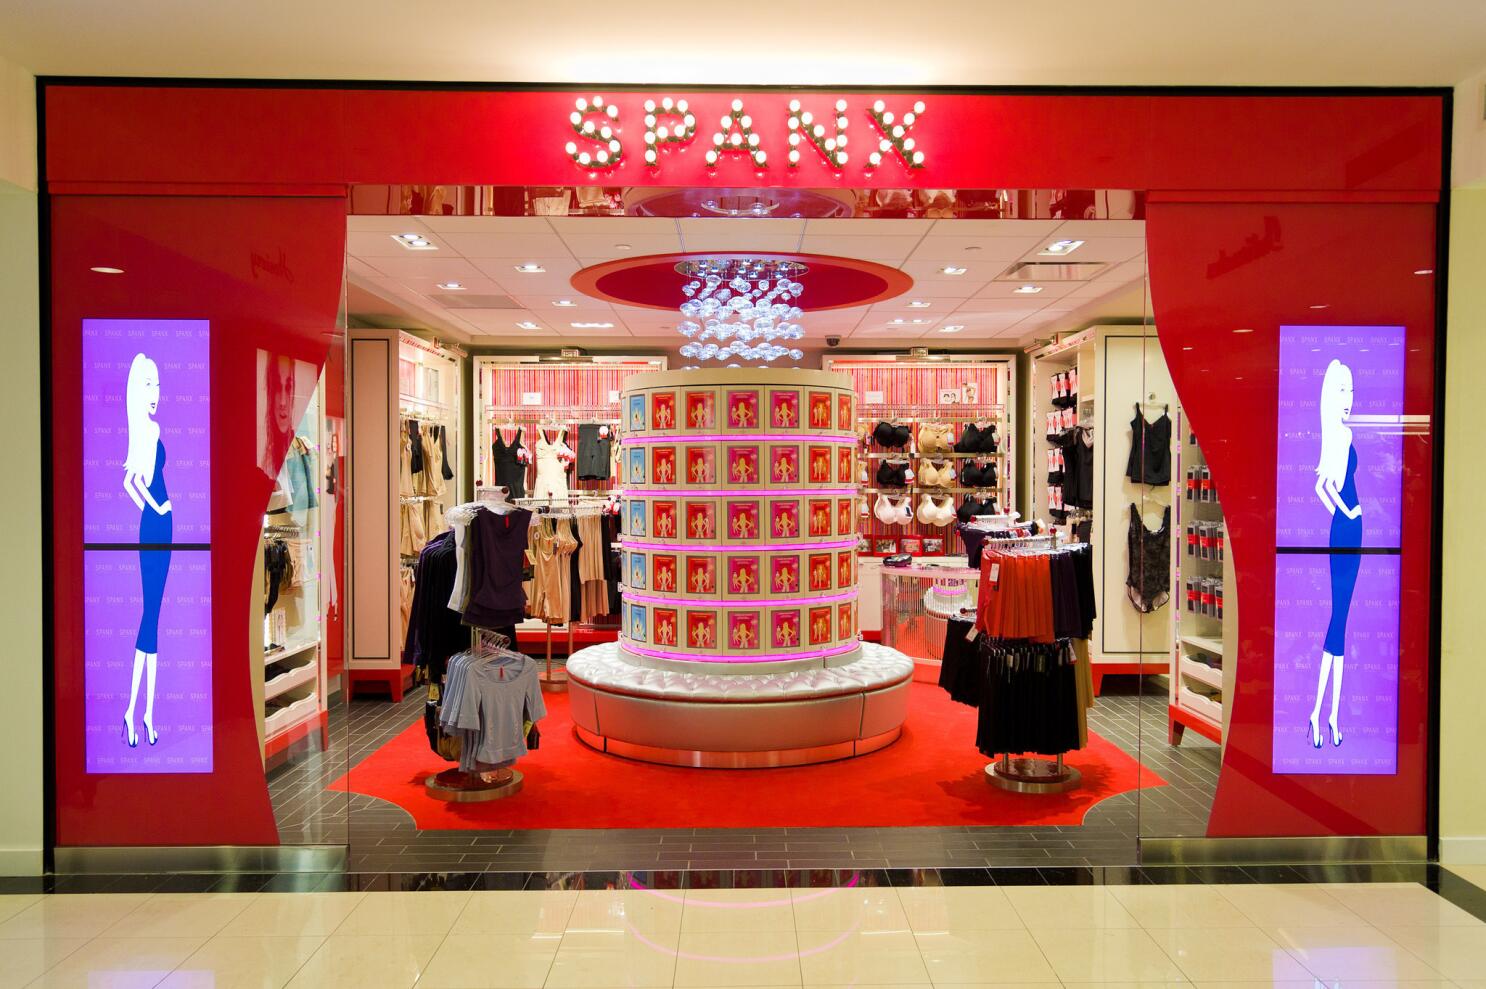 Tysons, USA - January 26, 2018: Spanx store sign entrance with